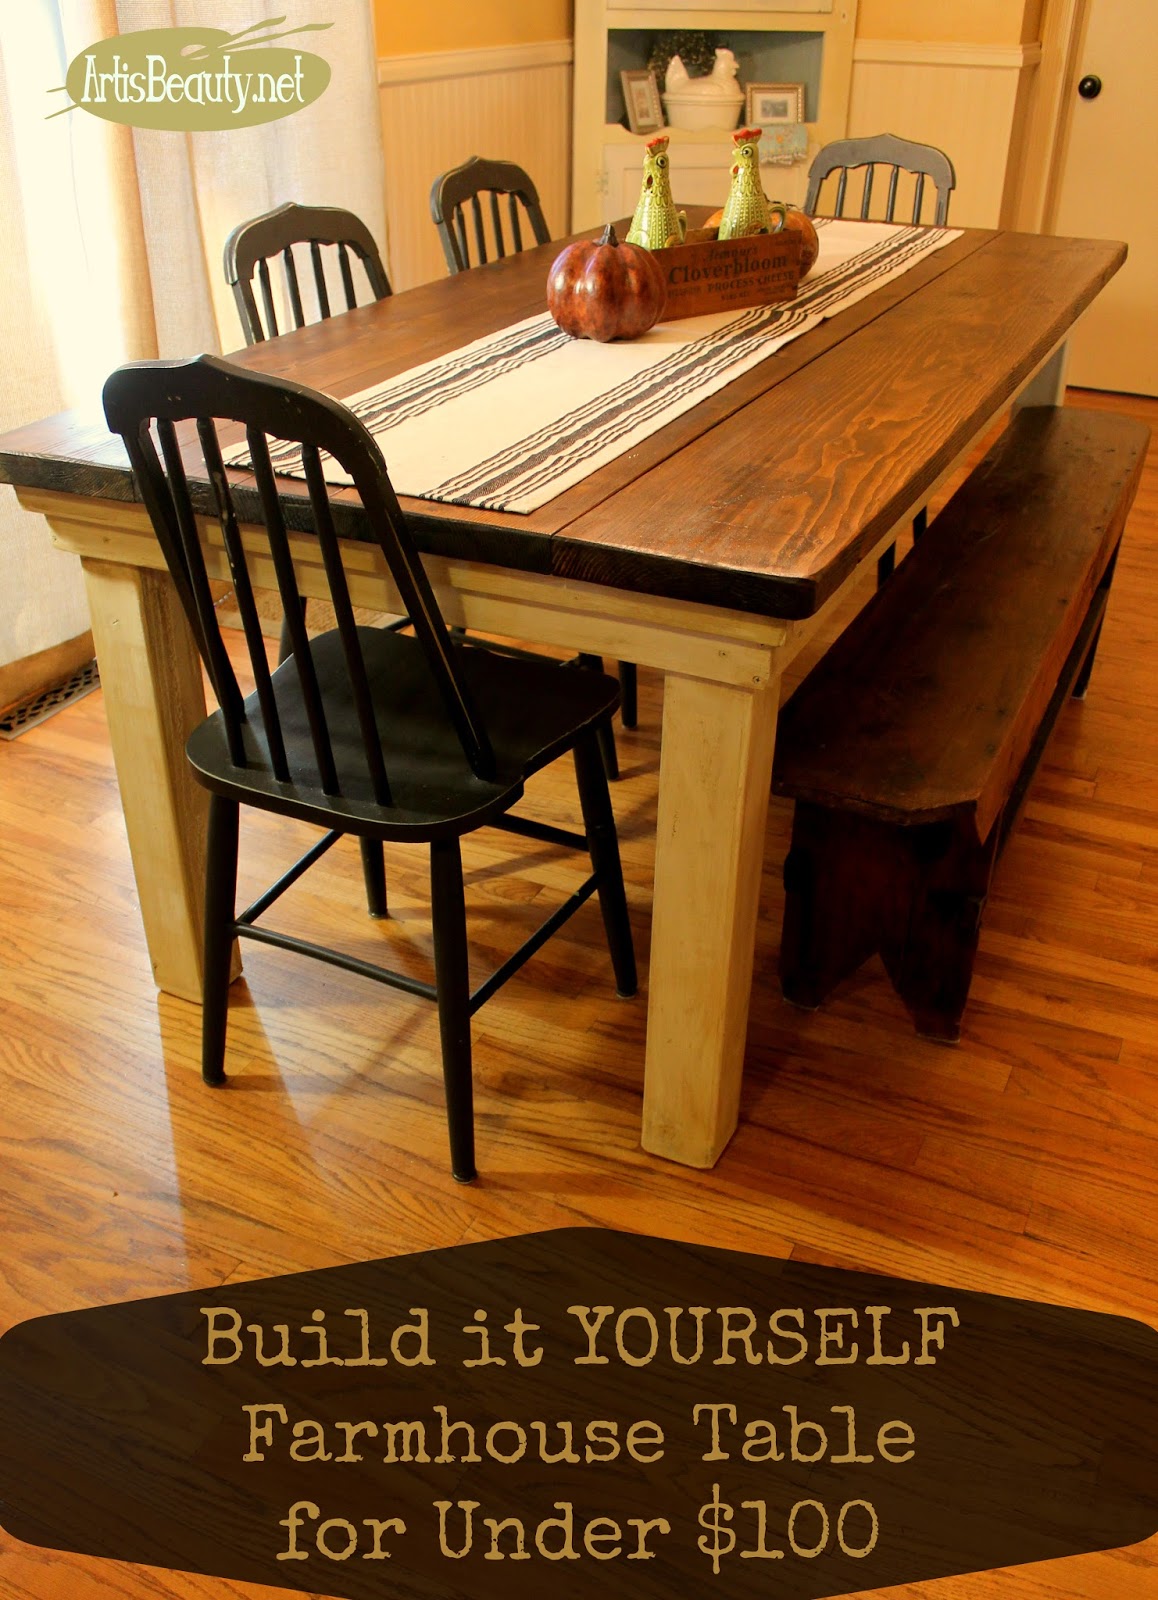 ART IS BEAUTY: How to build your own FarmHouse Table for 